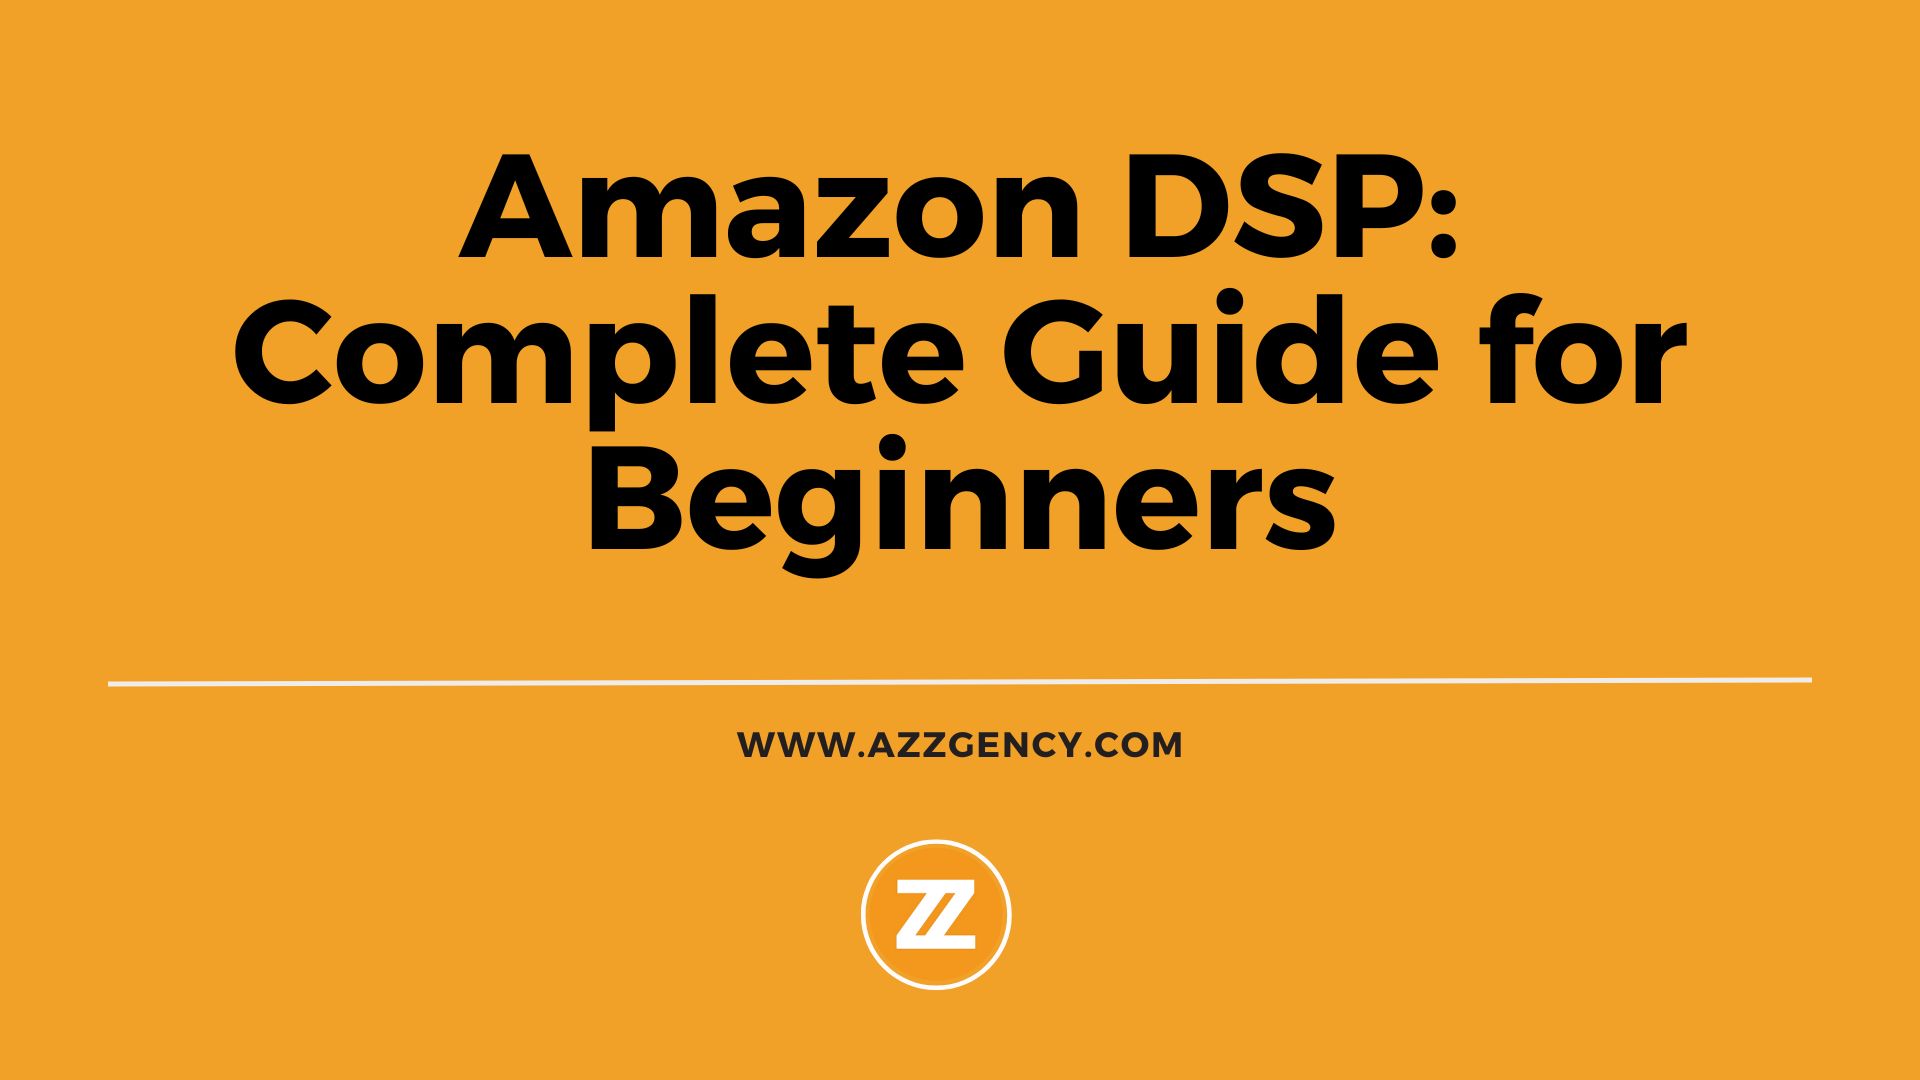 Amazon DSP beginners guide